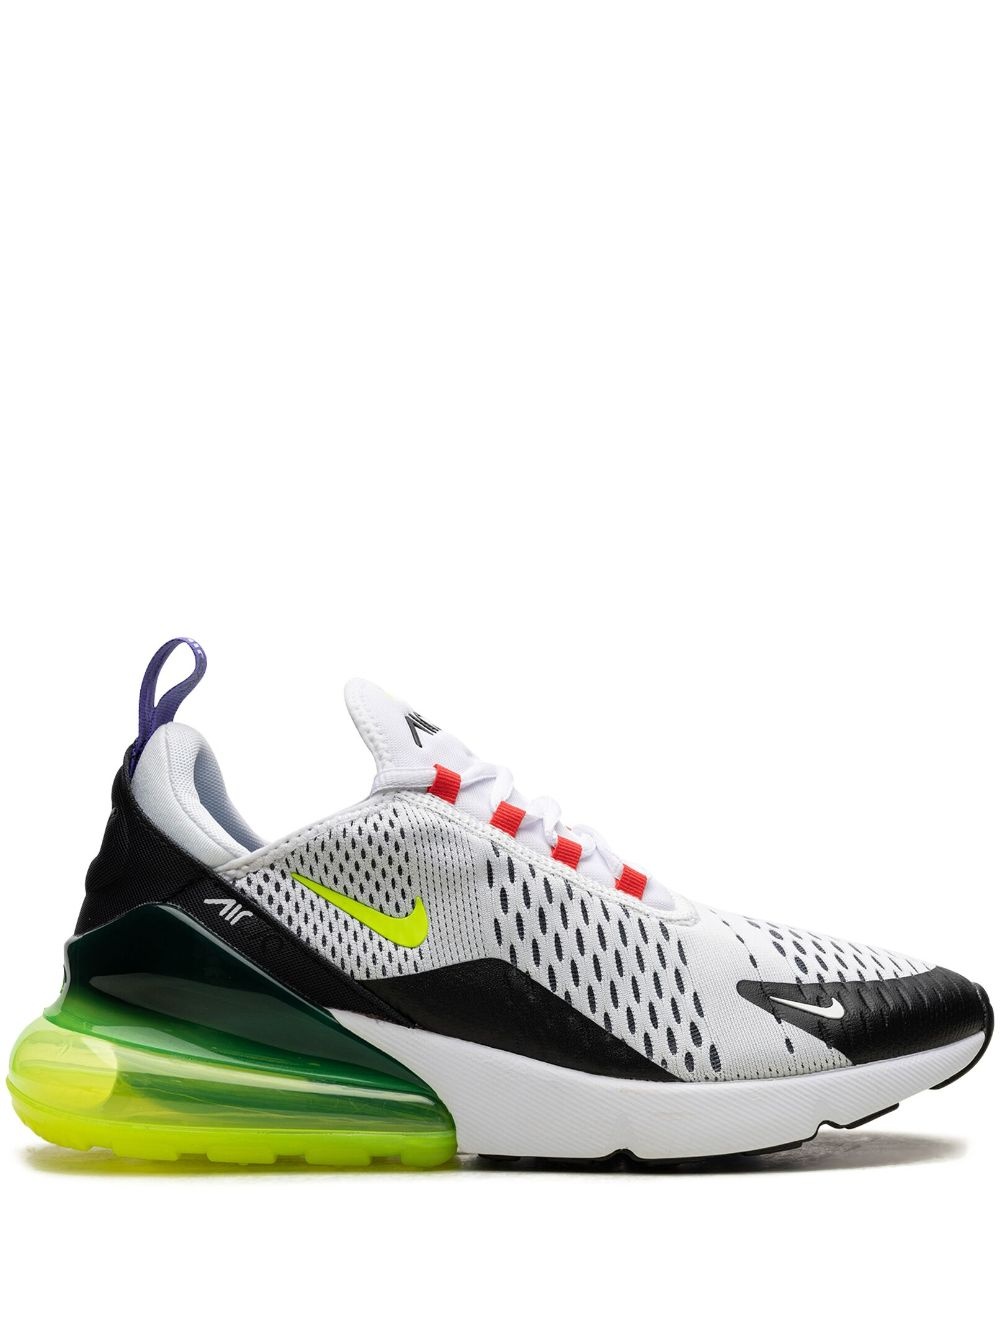 Air Max 270 "White/Volt/Siren Red" sneakers - 1